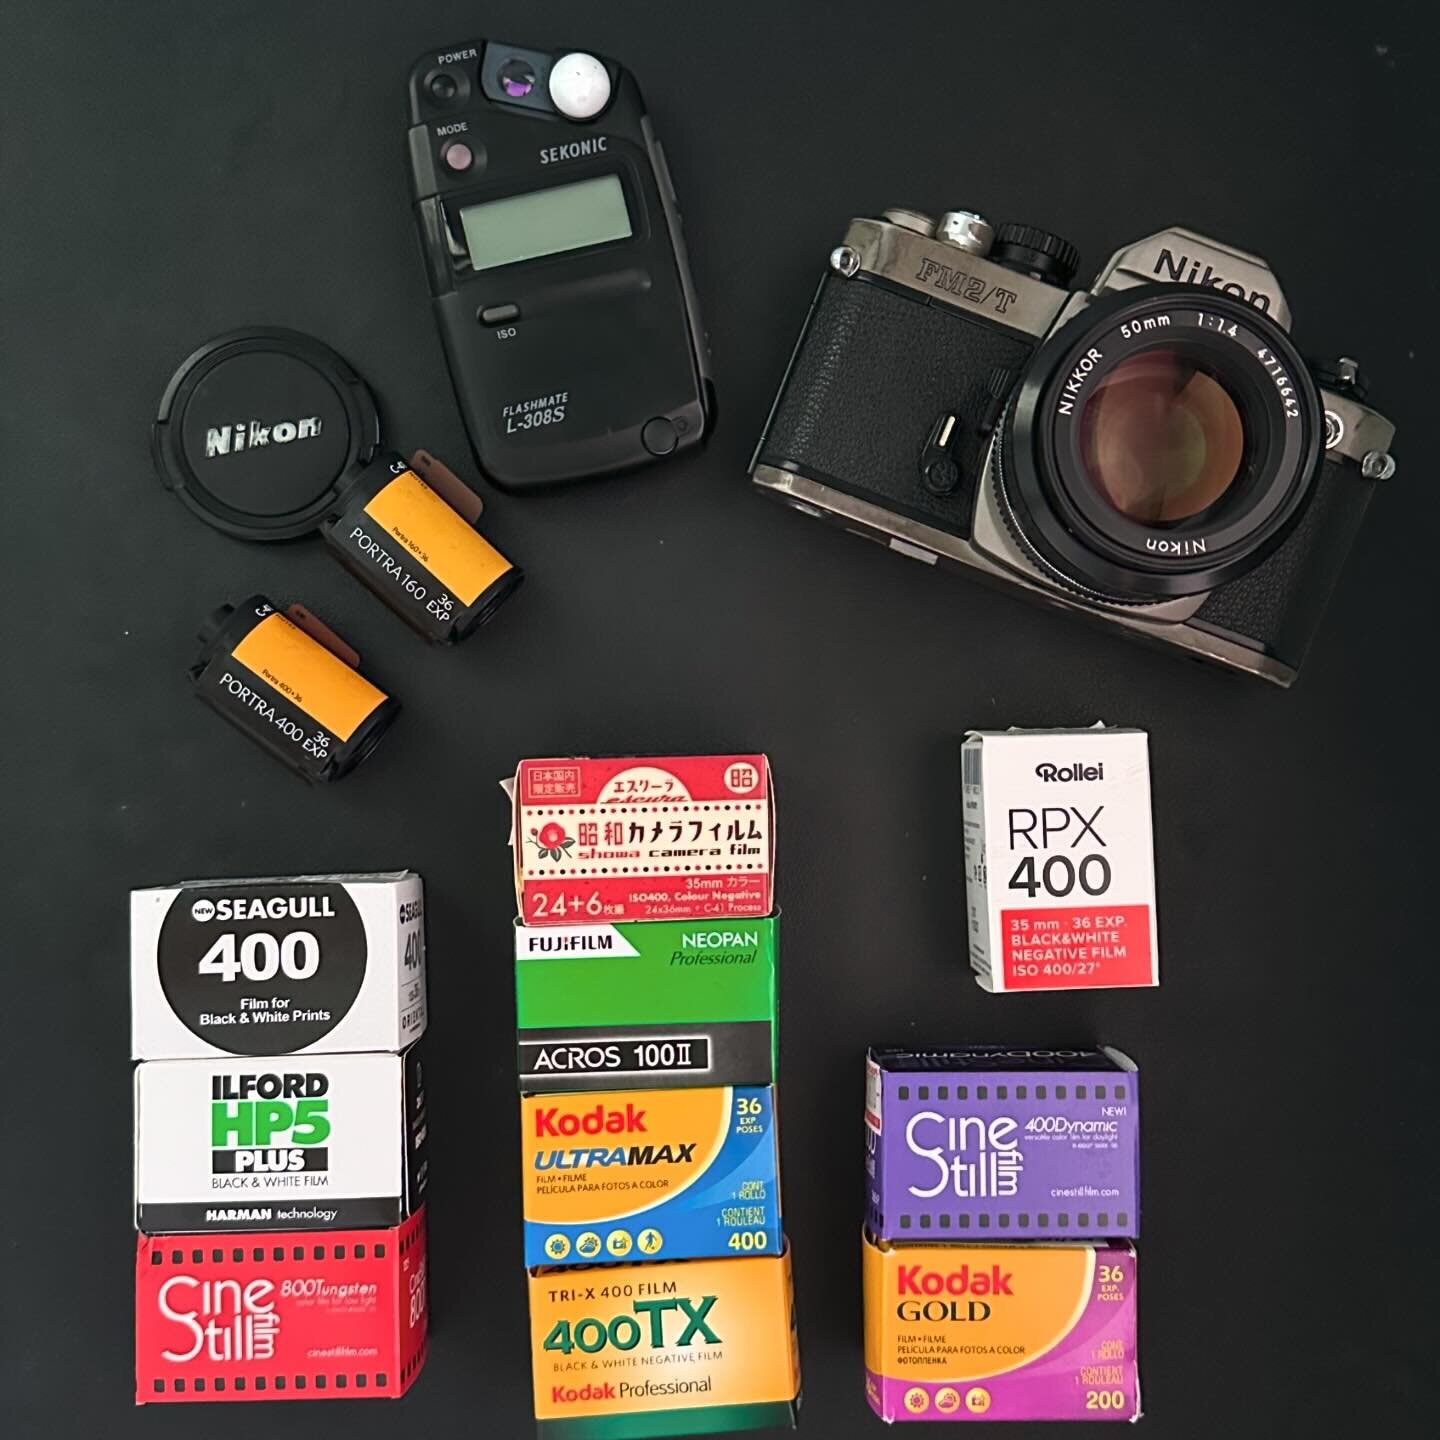 Film Project 2024, a roll of film for every month.

Film photography holds a very special place in my heart as it was where I started learning photography. Looking back, i was fiddling on my tiny Konica c35 viewfinder to my Leica m6 which developed m